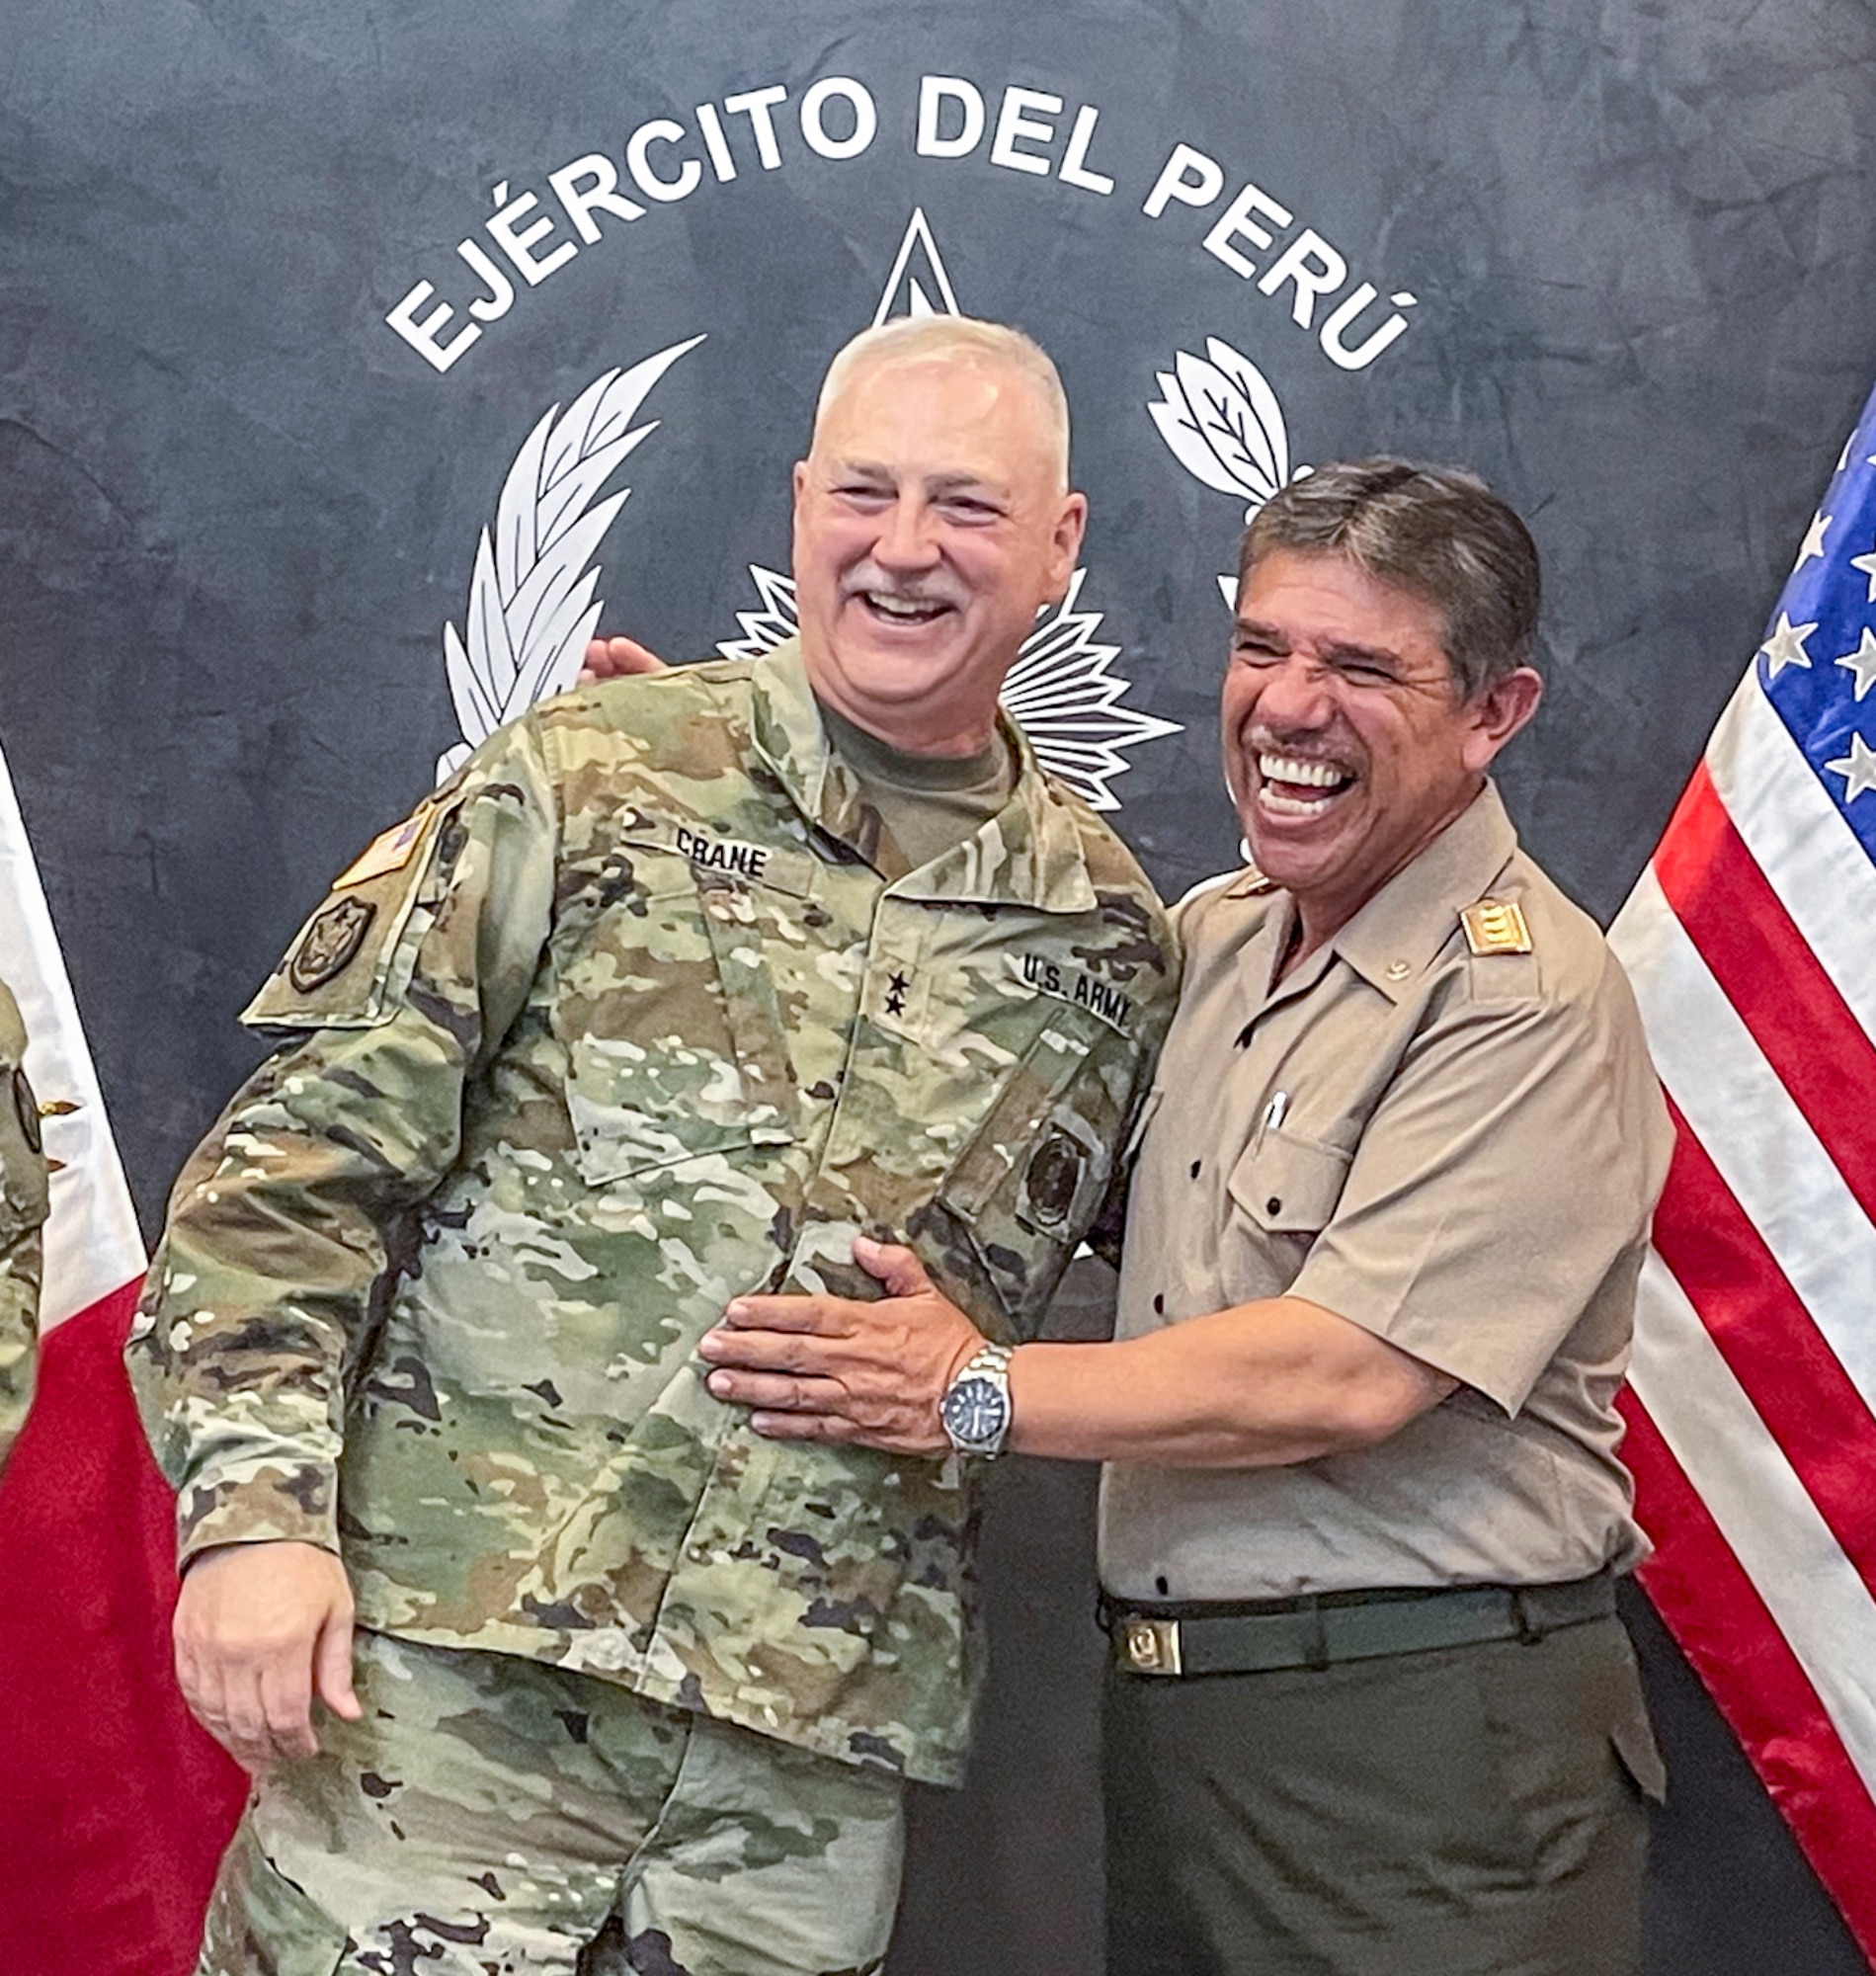 Maj. Gen. Bill Crane, adjutant general of the West Virginia National Guard, laughs with Gen. Orestes Vargas, Peruvian Army chief of staff, in Lima, Peru, in late March 2024. The West Virginia Guard partners with Peru, Qatar and Gabon via the Department of Defense National Guard Bureau State Partnership Program.